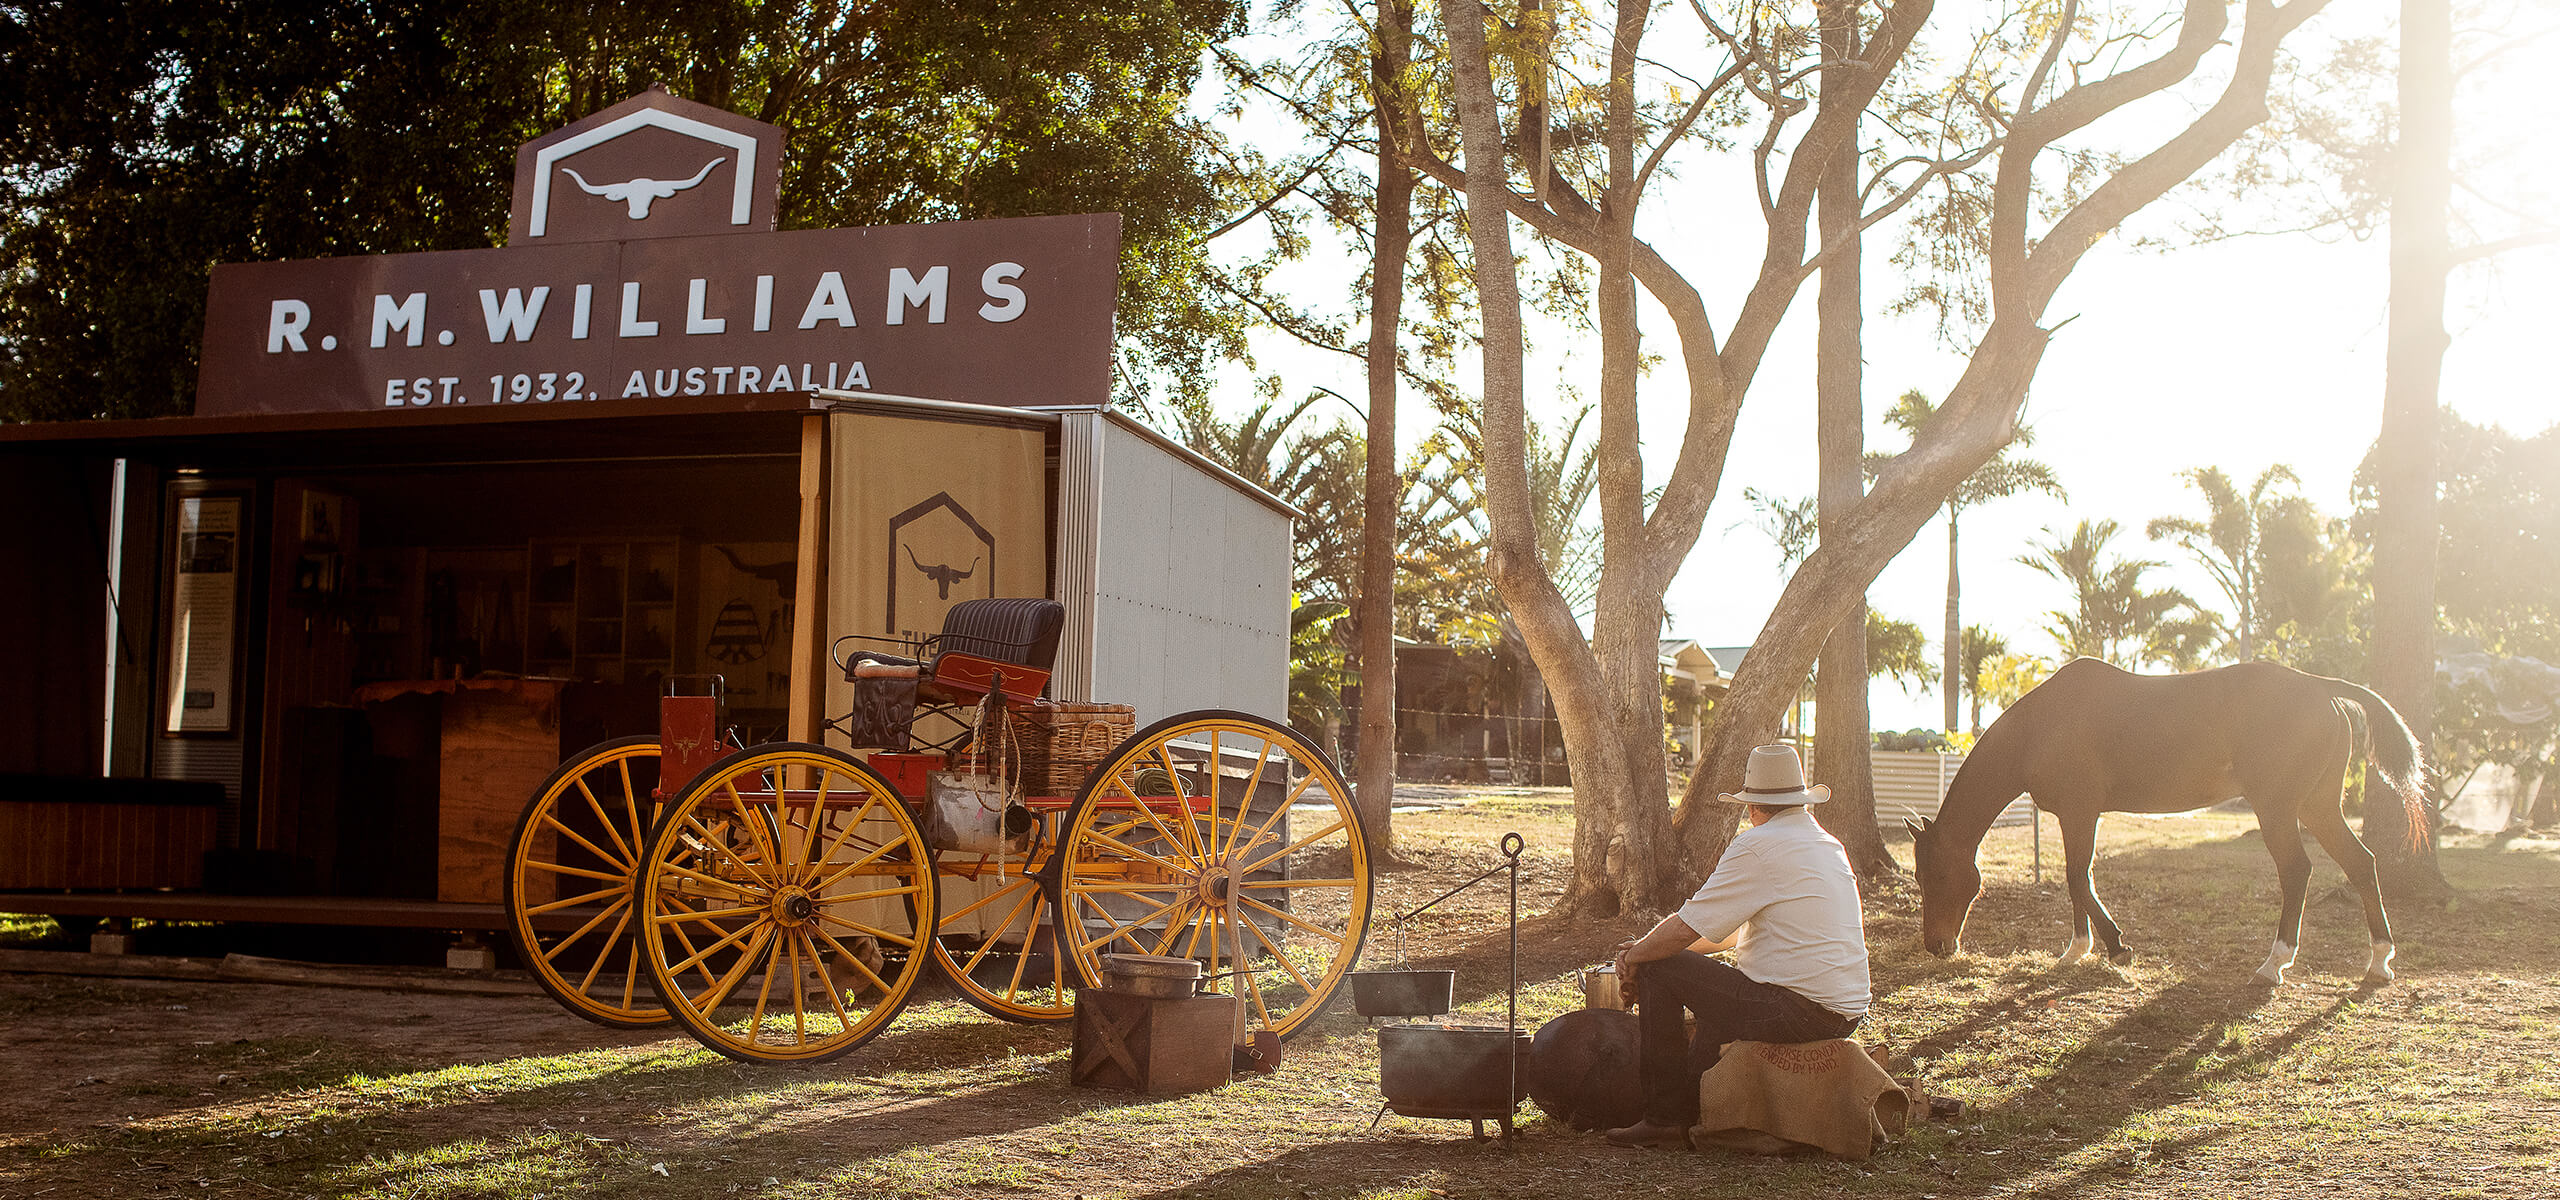 Introducing The Hut - The R.M.Williams travelling workshop